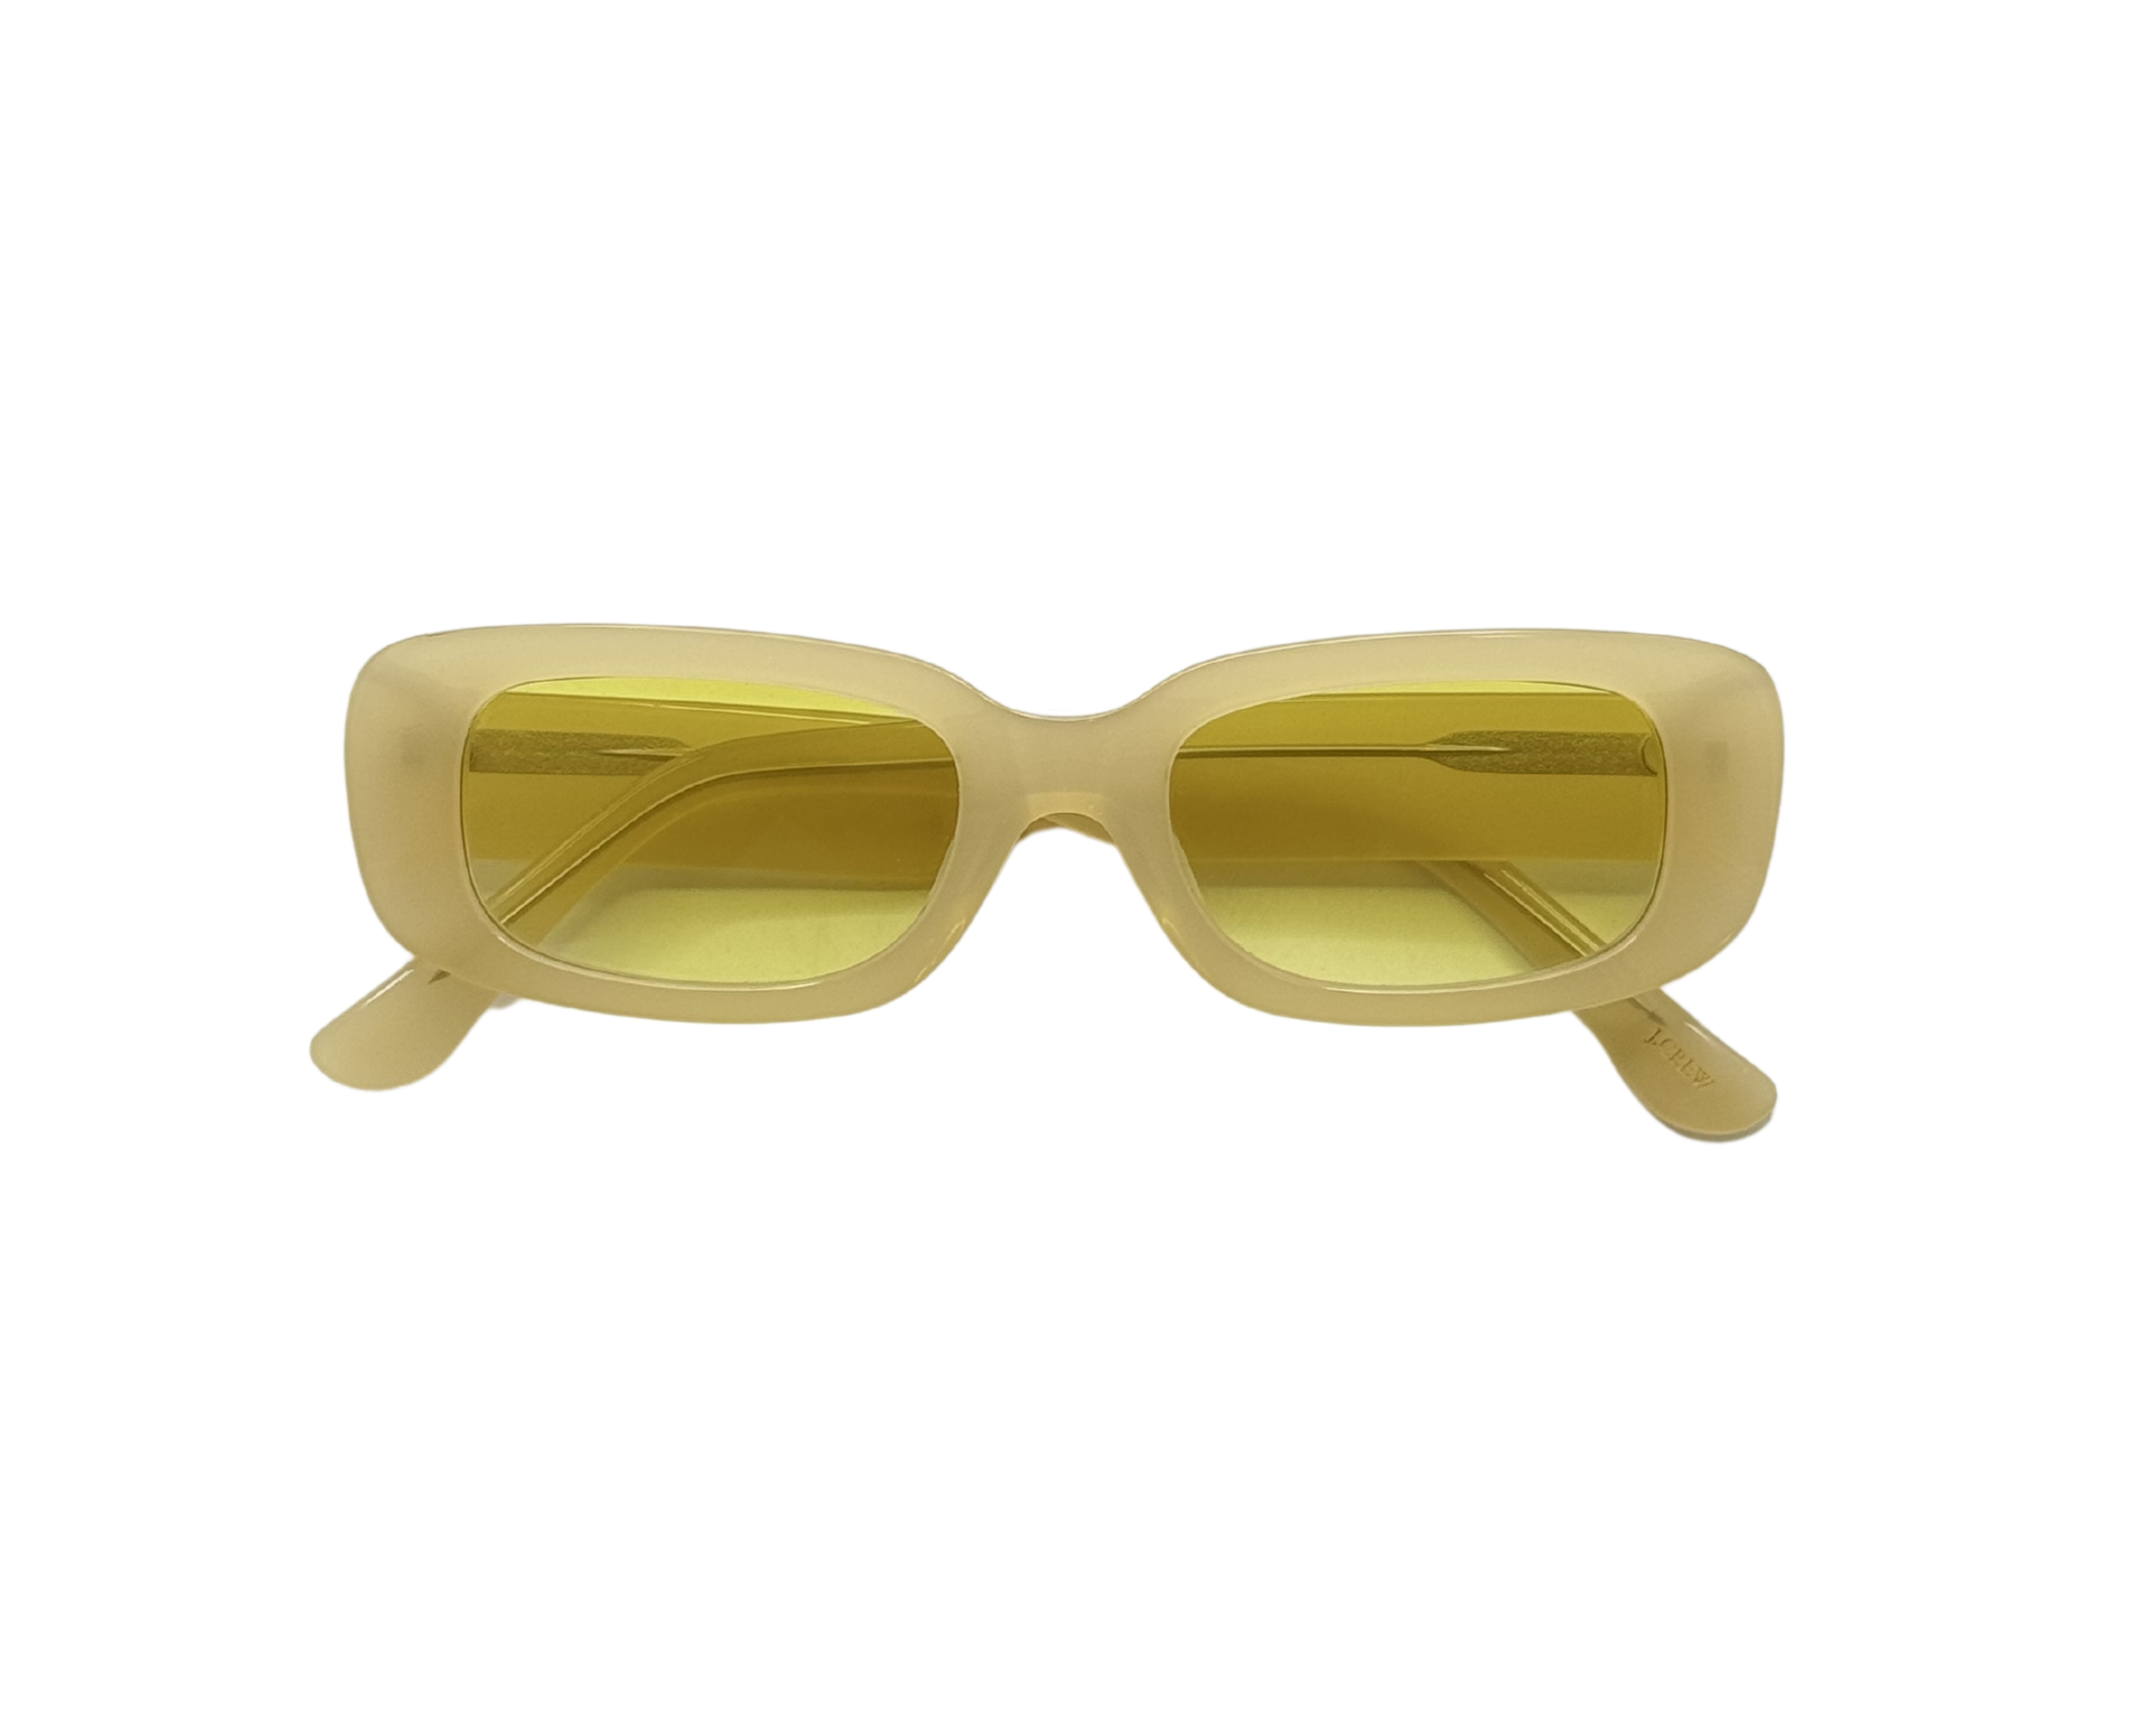 NS Deluxe - 0101 - Pearl White - Sunglasses